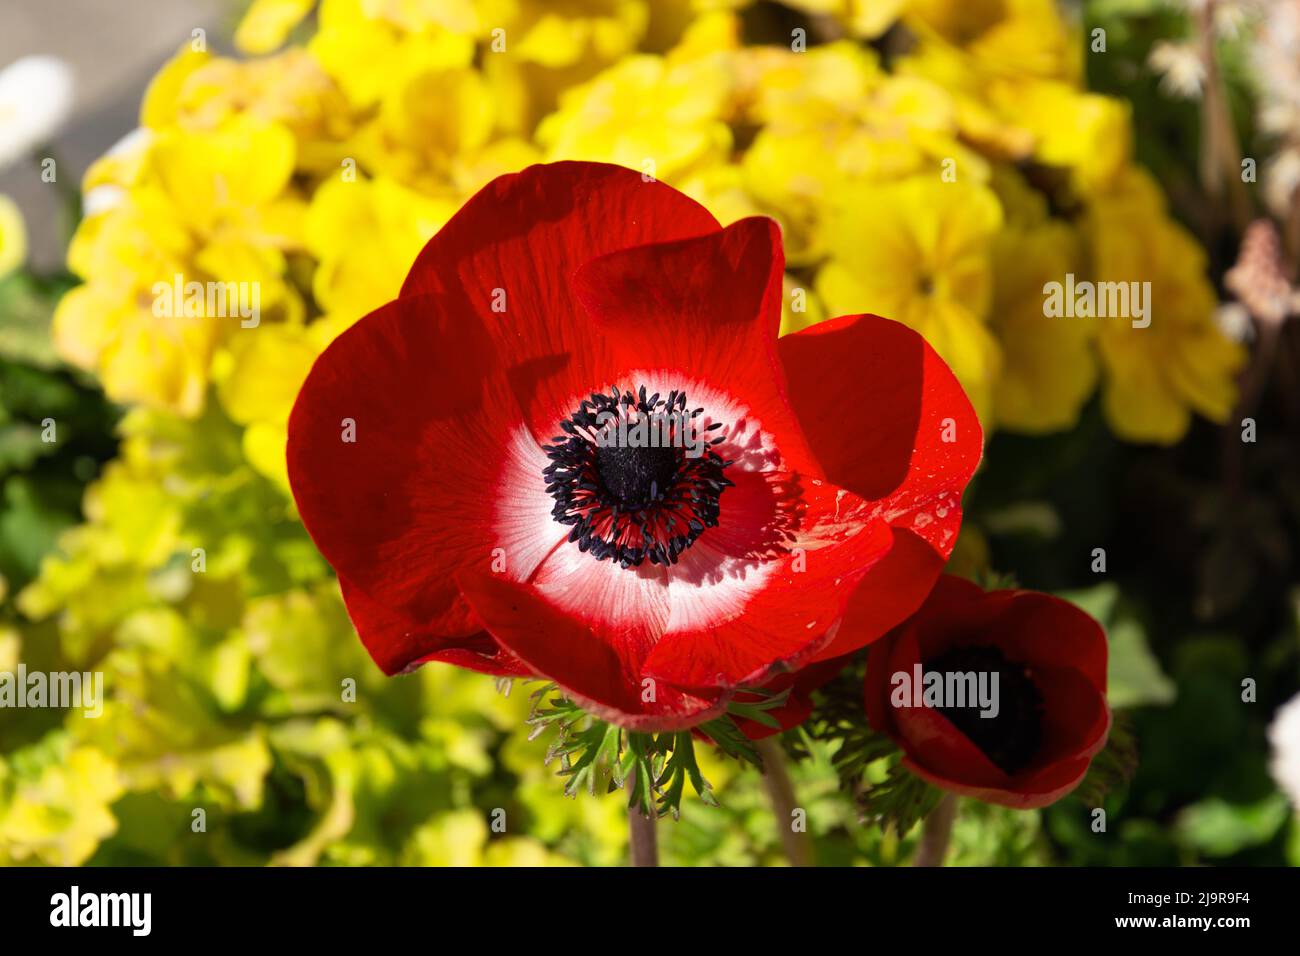 Anemone coronaria or windflower in bloom with red and white petals and black pistils in the centre in april Stock Photo